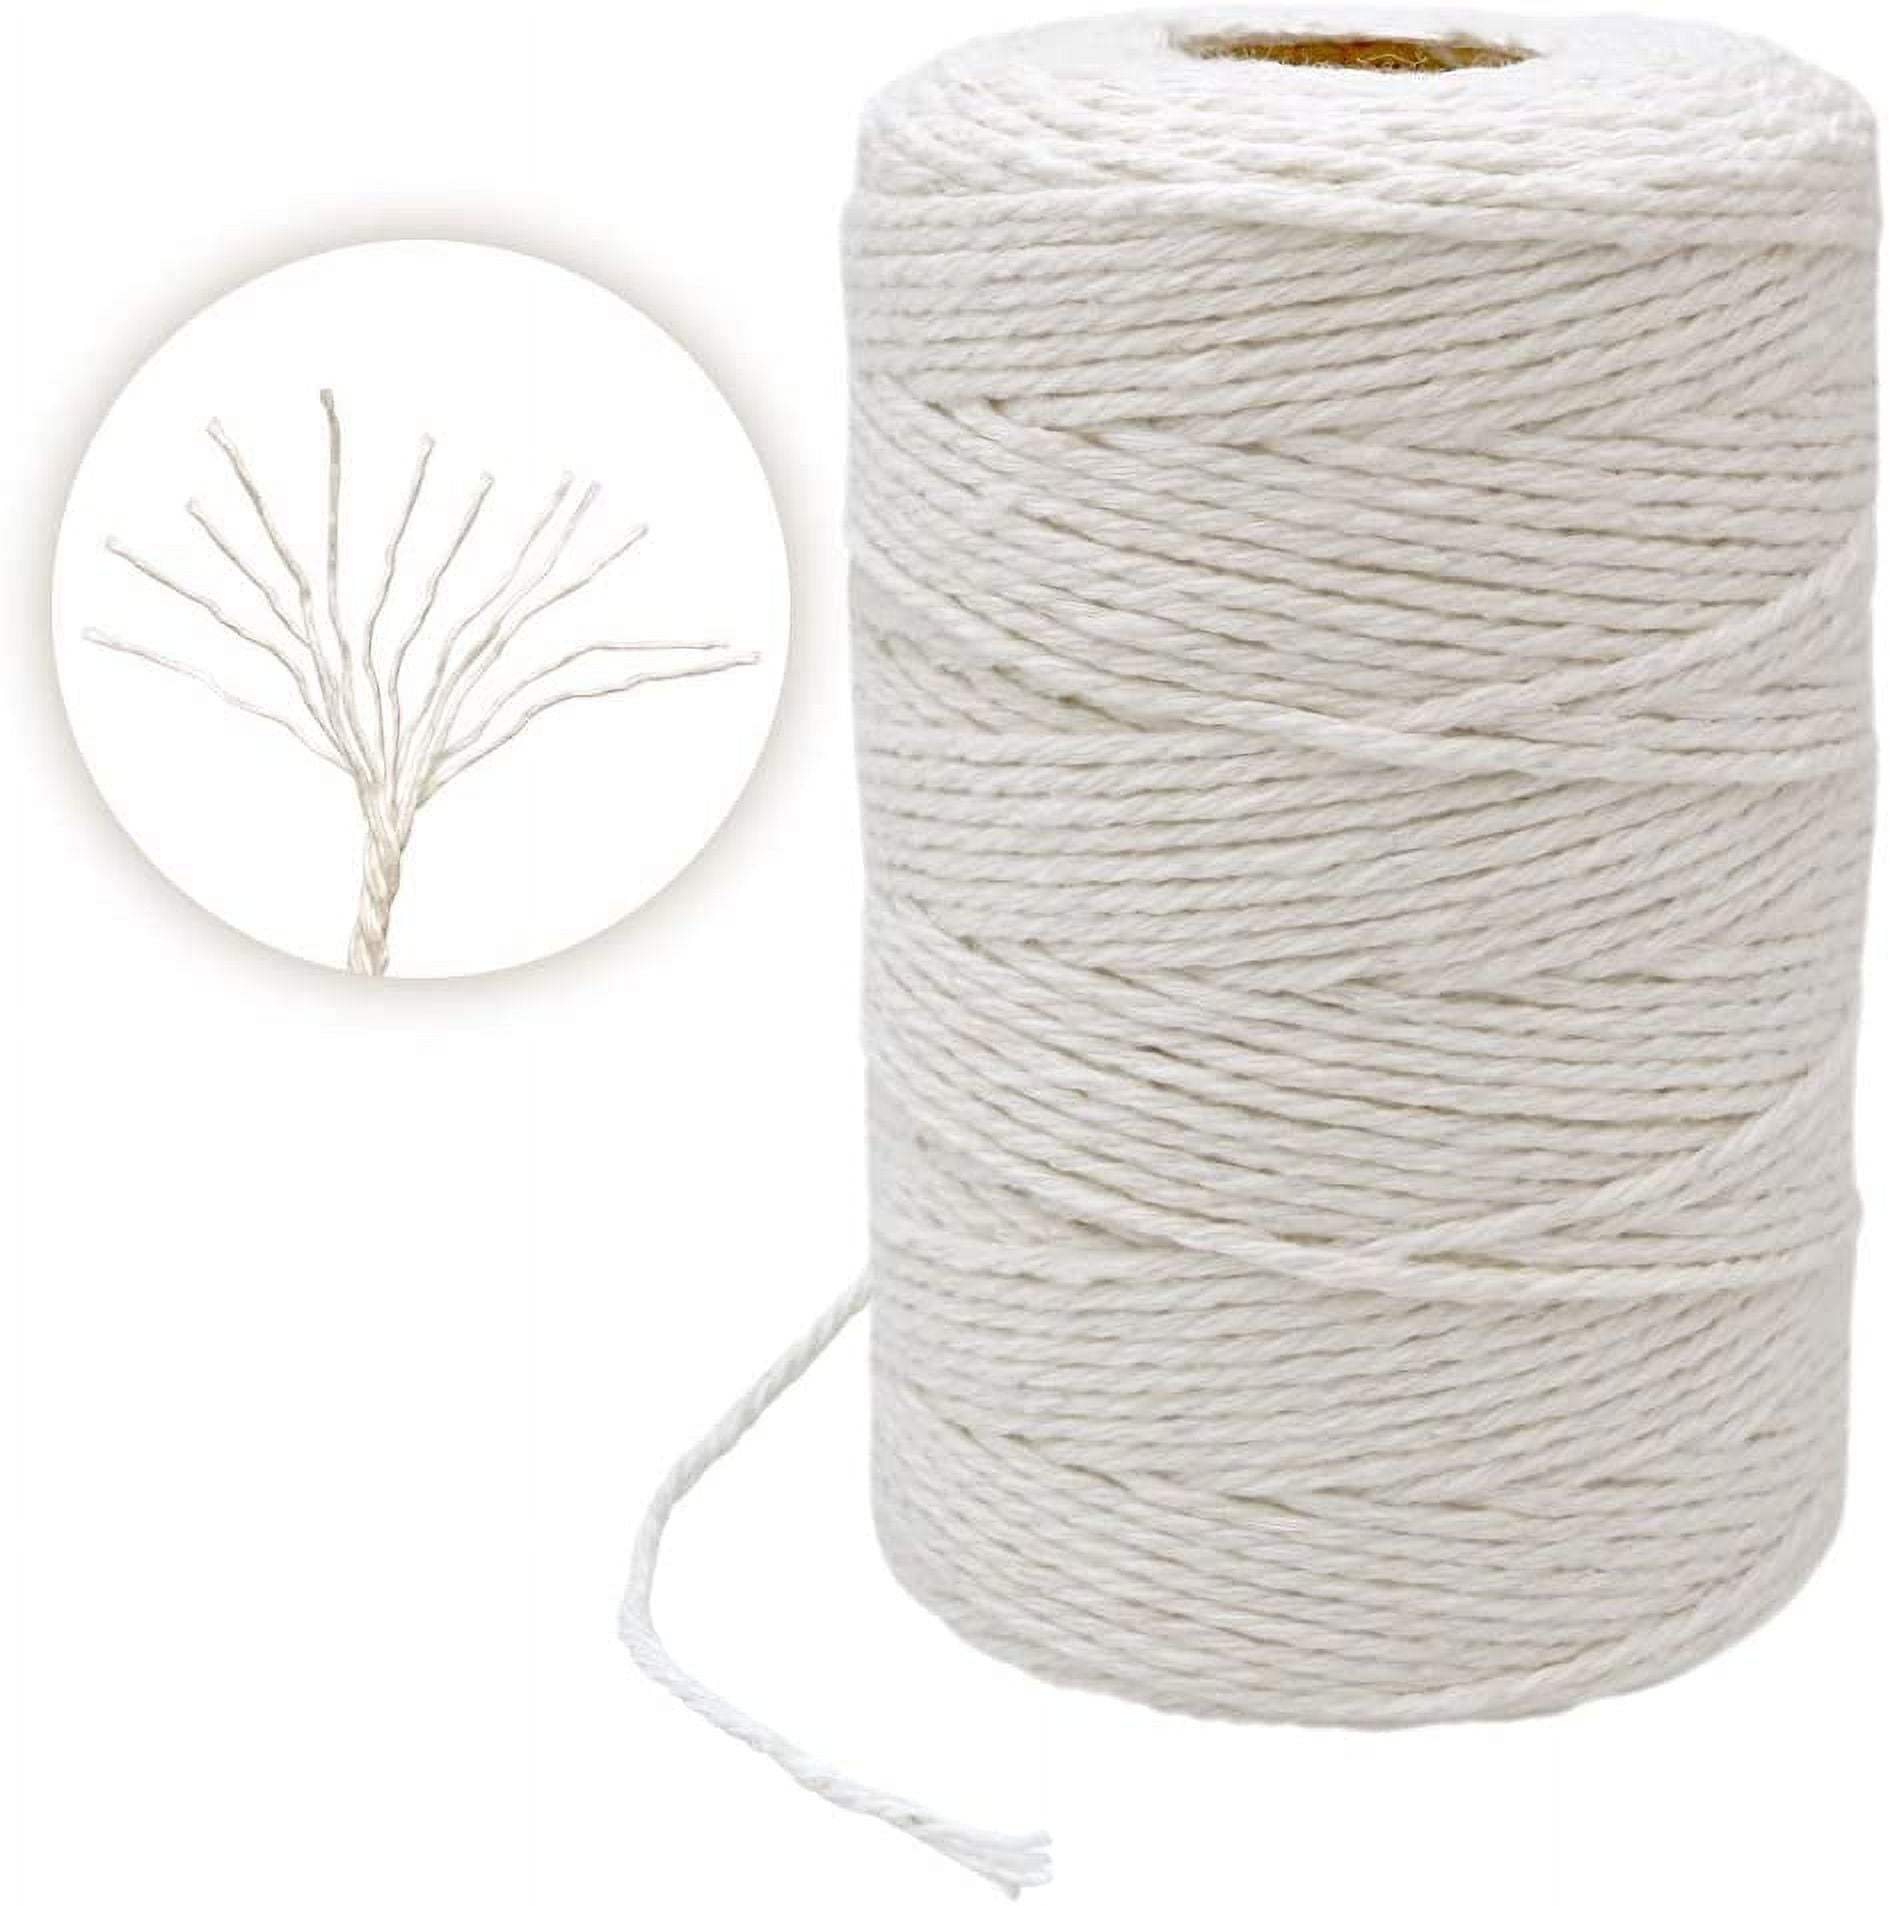 400 Meters/1312 Feet Cotton String,12-Ply Natural White String,Bakers Twine  for Tying Homemade Meat,Making Sausage,DIY Craft and Gardening